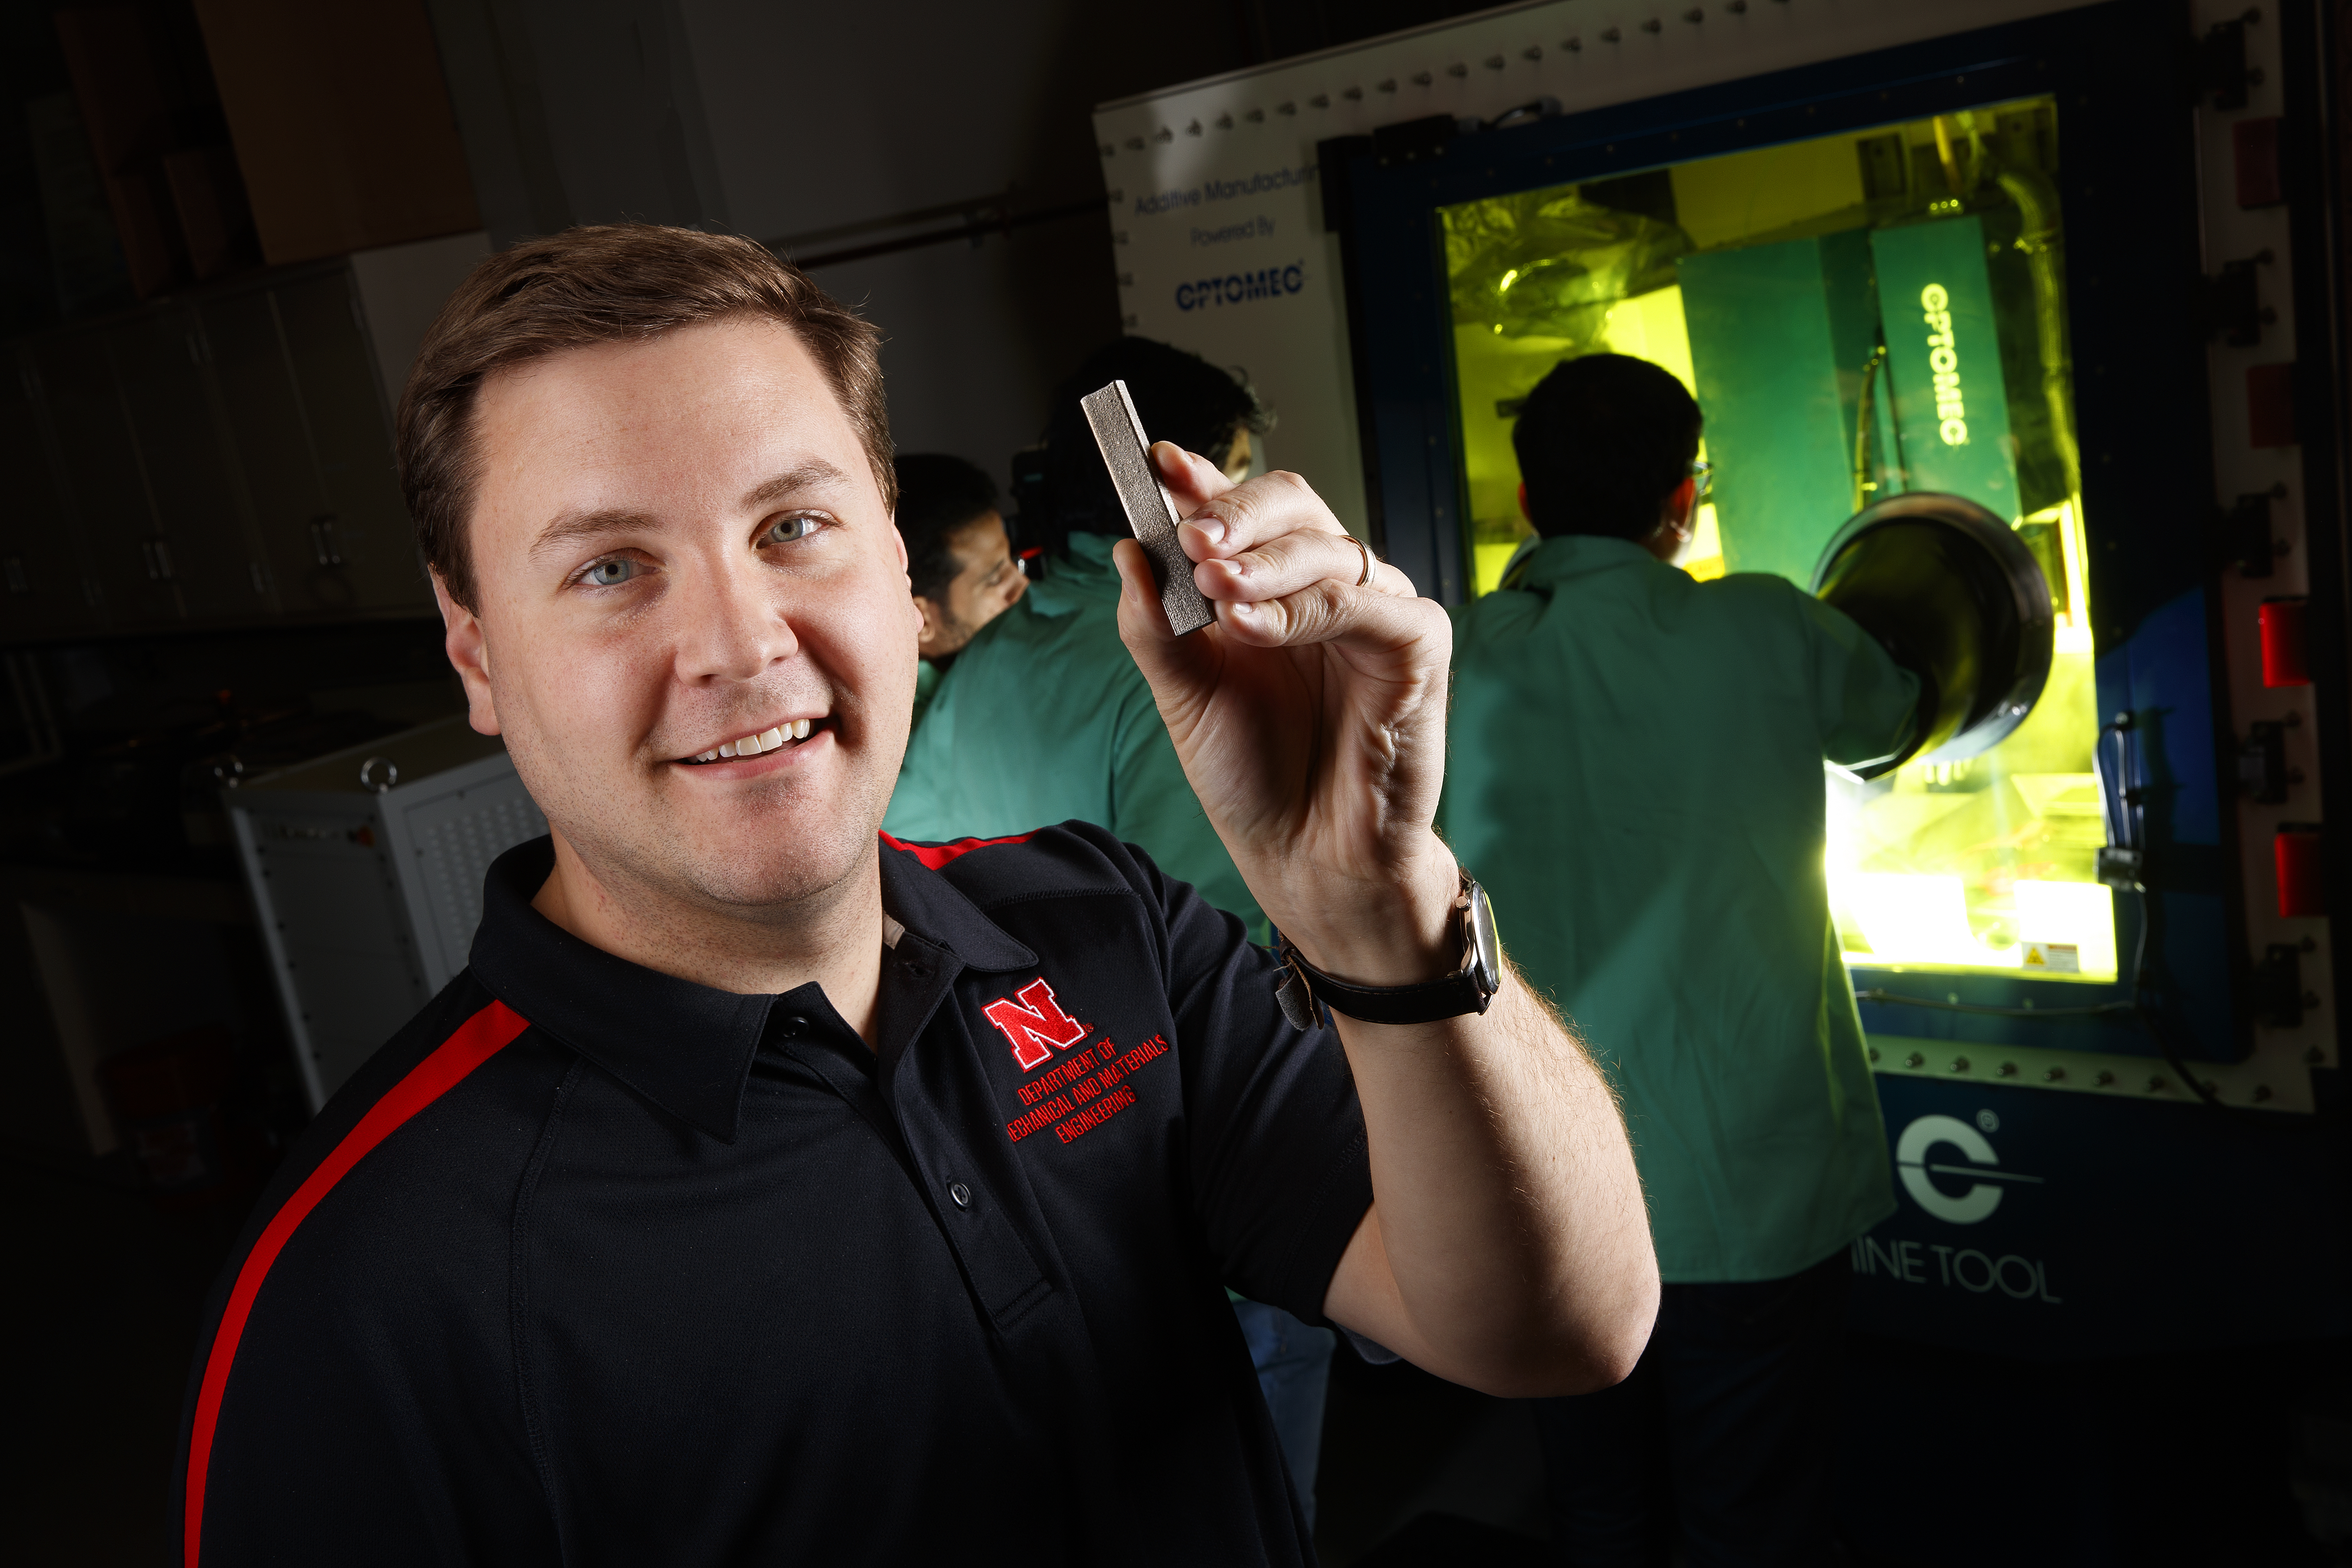 Nebraska engineering Michael Sealy has received a $500,000 National Science Foundation award to support his research into using 3D metal printers to create strong, dissolvable medical implants. The approach may also be used to manufacture military and transportation components and for emerging technologies.